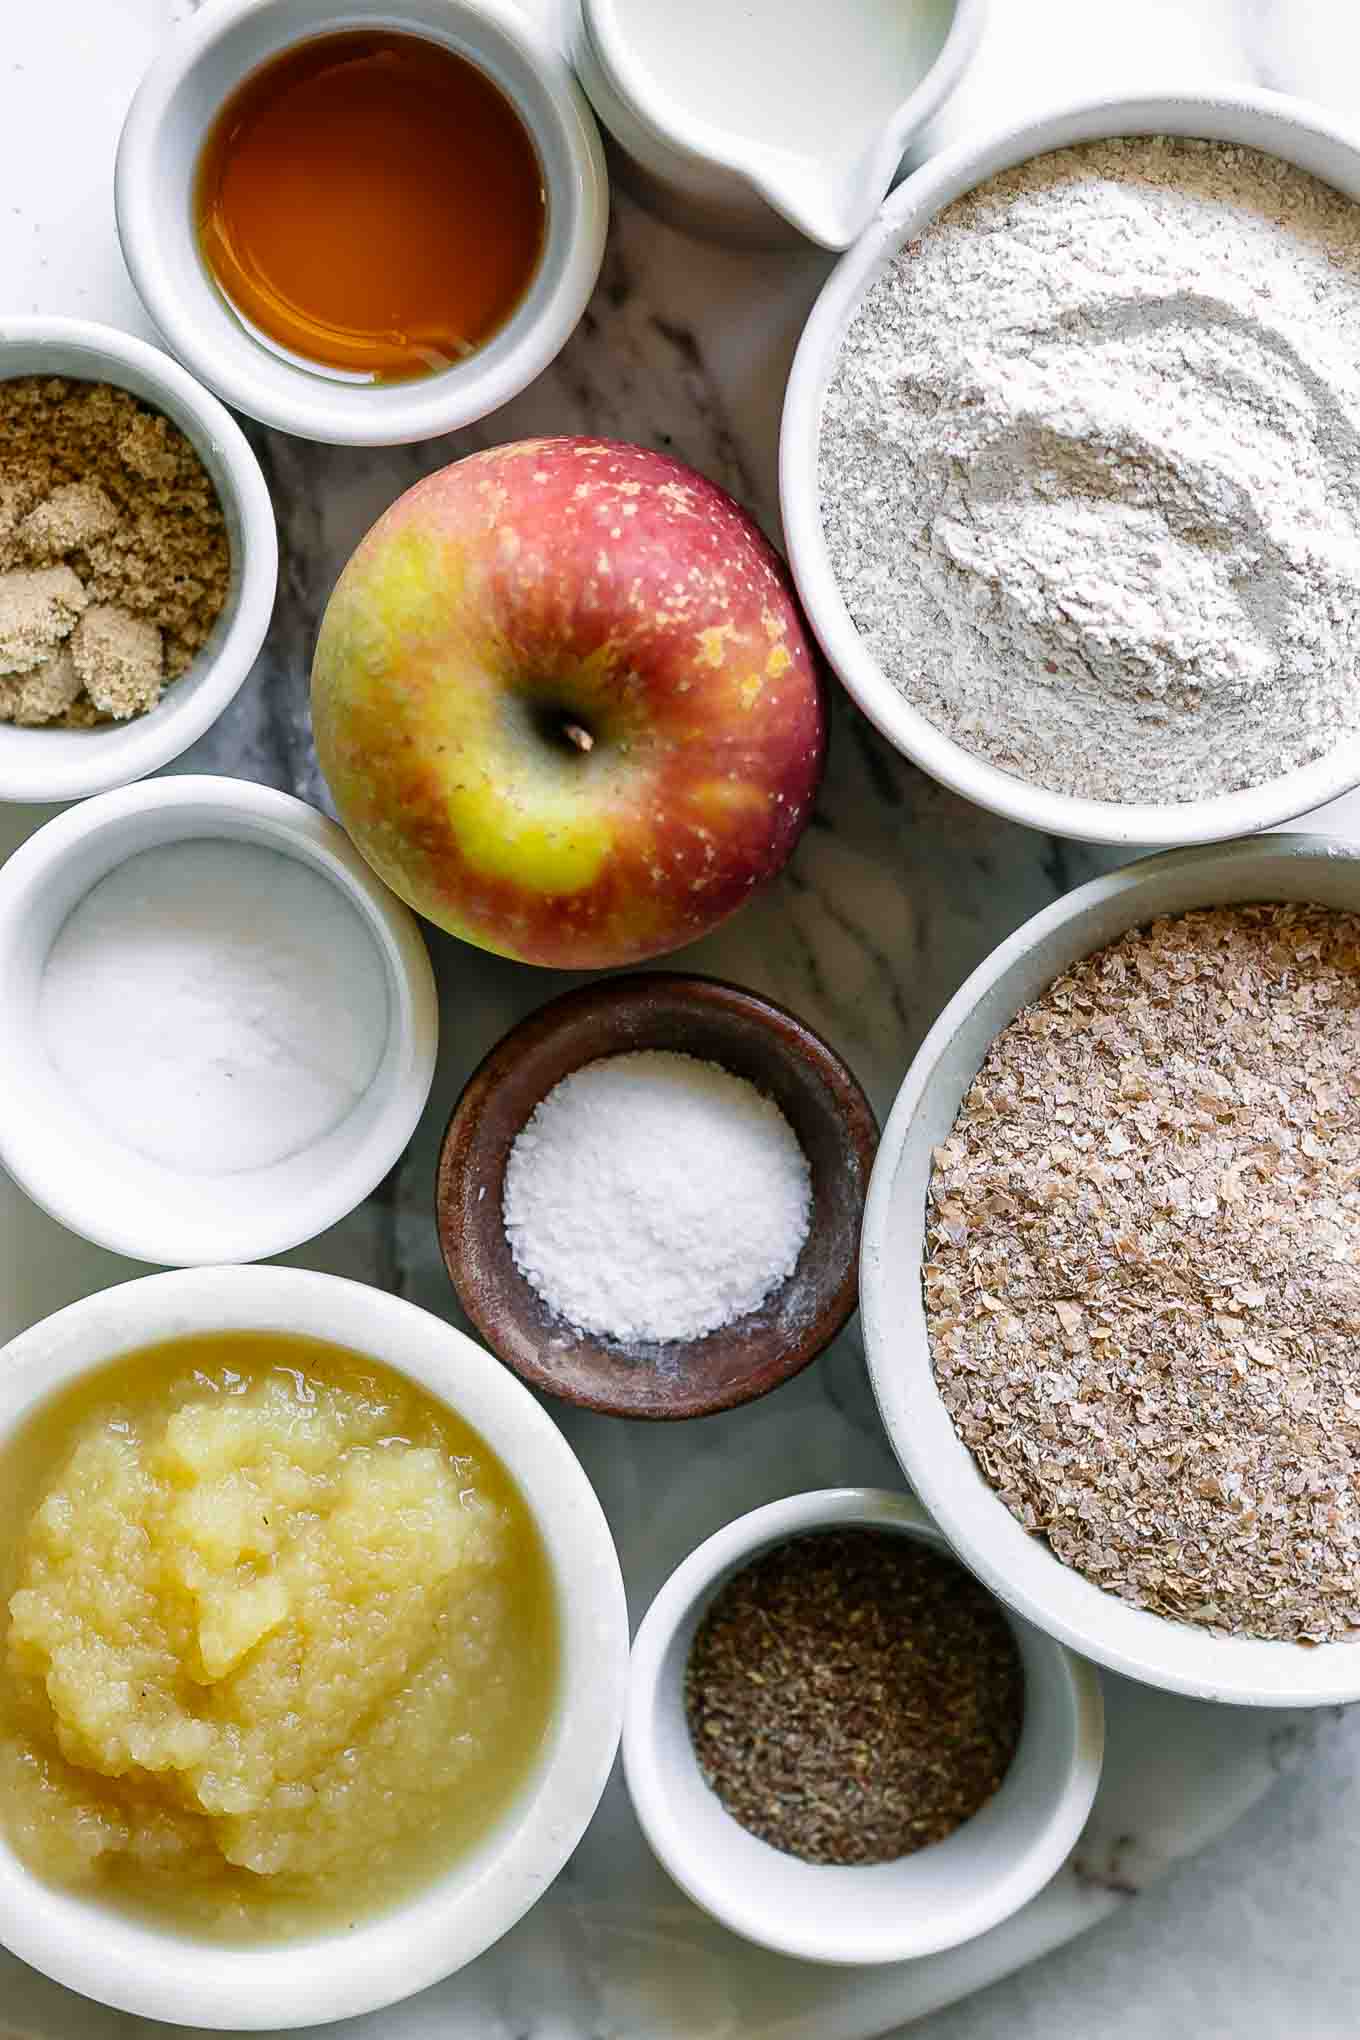 bowls of wheat flour, wheat bran, apple sauce, apples, and other ingredients for apple bran muffins